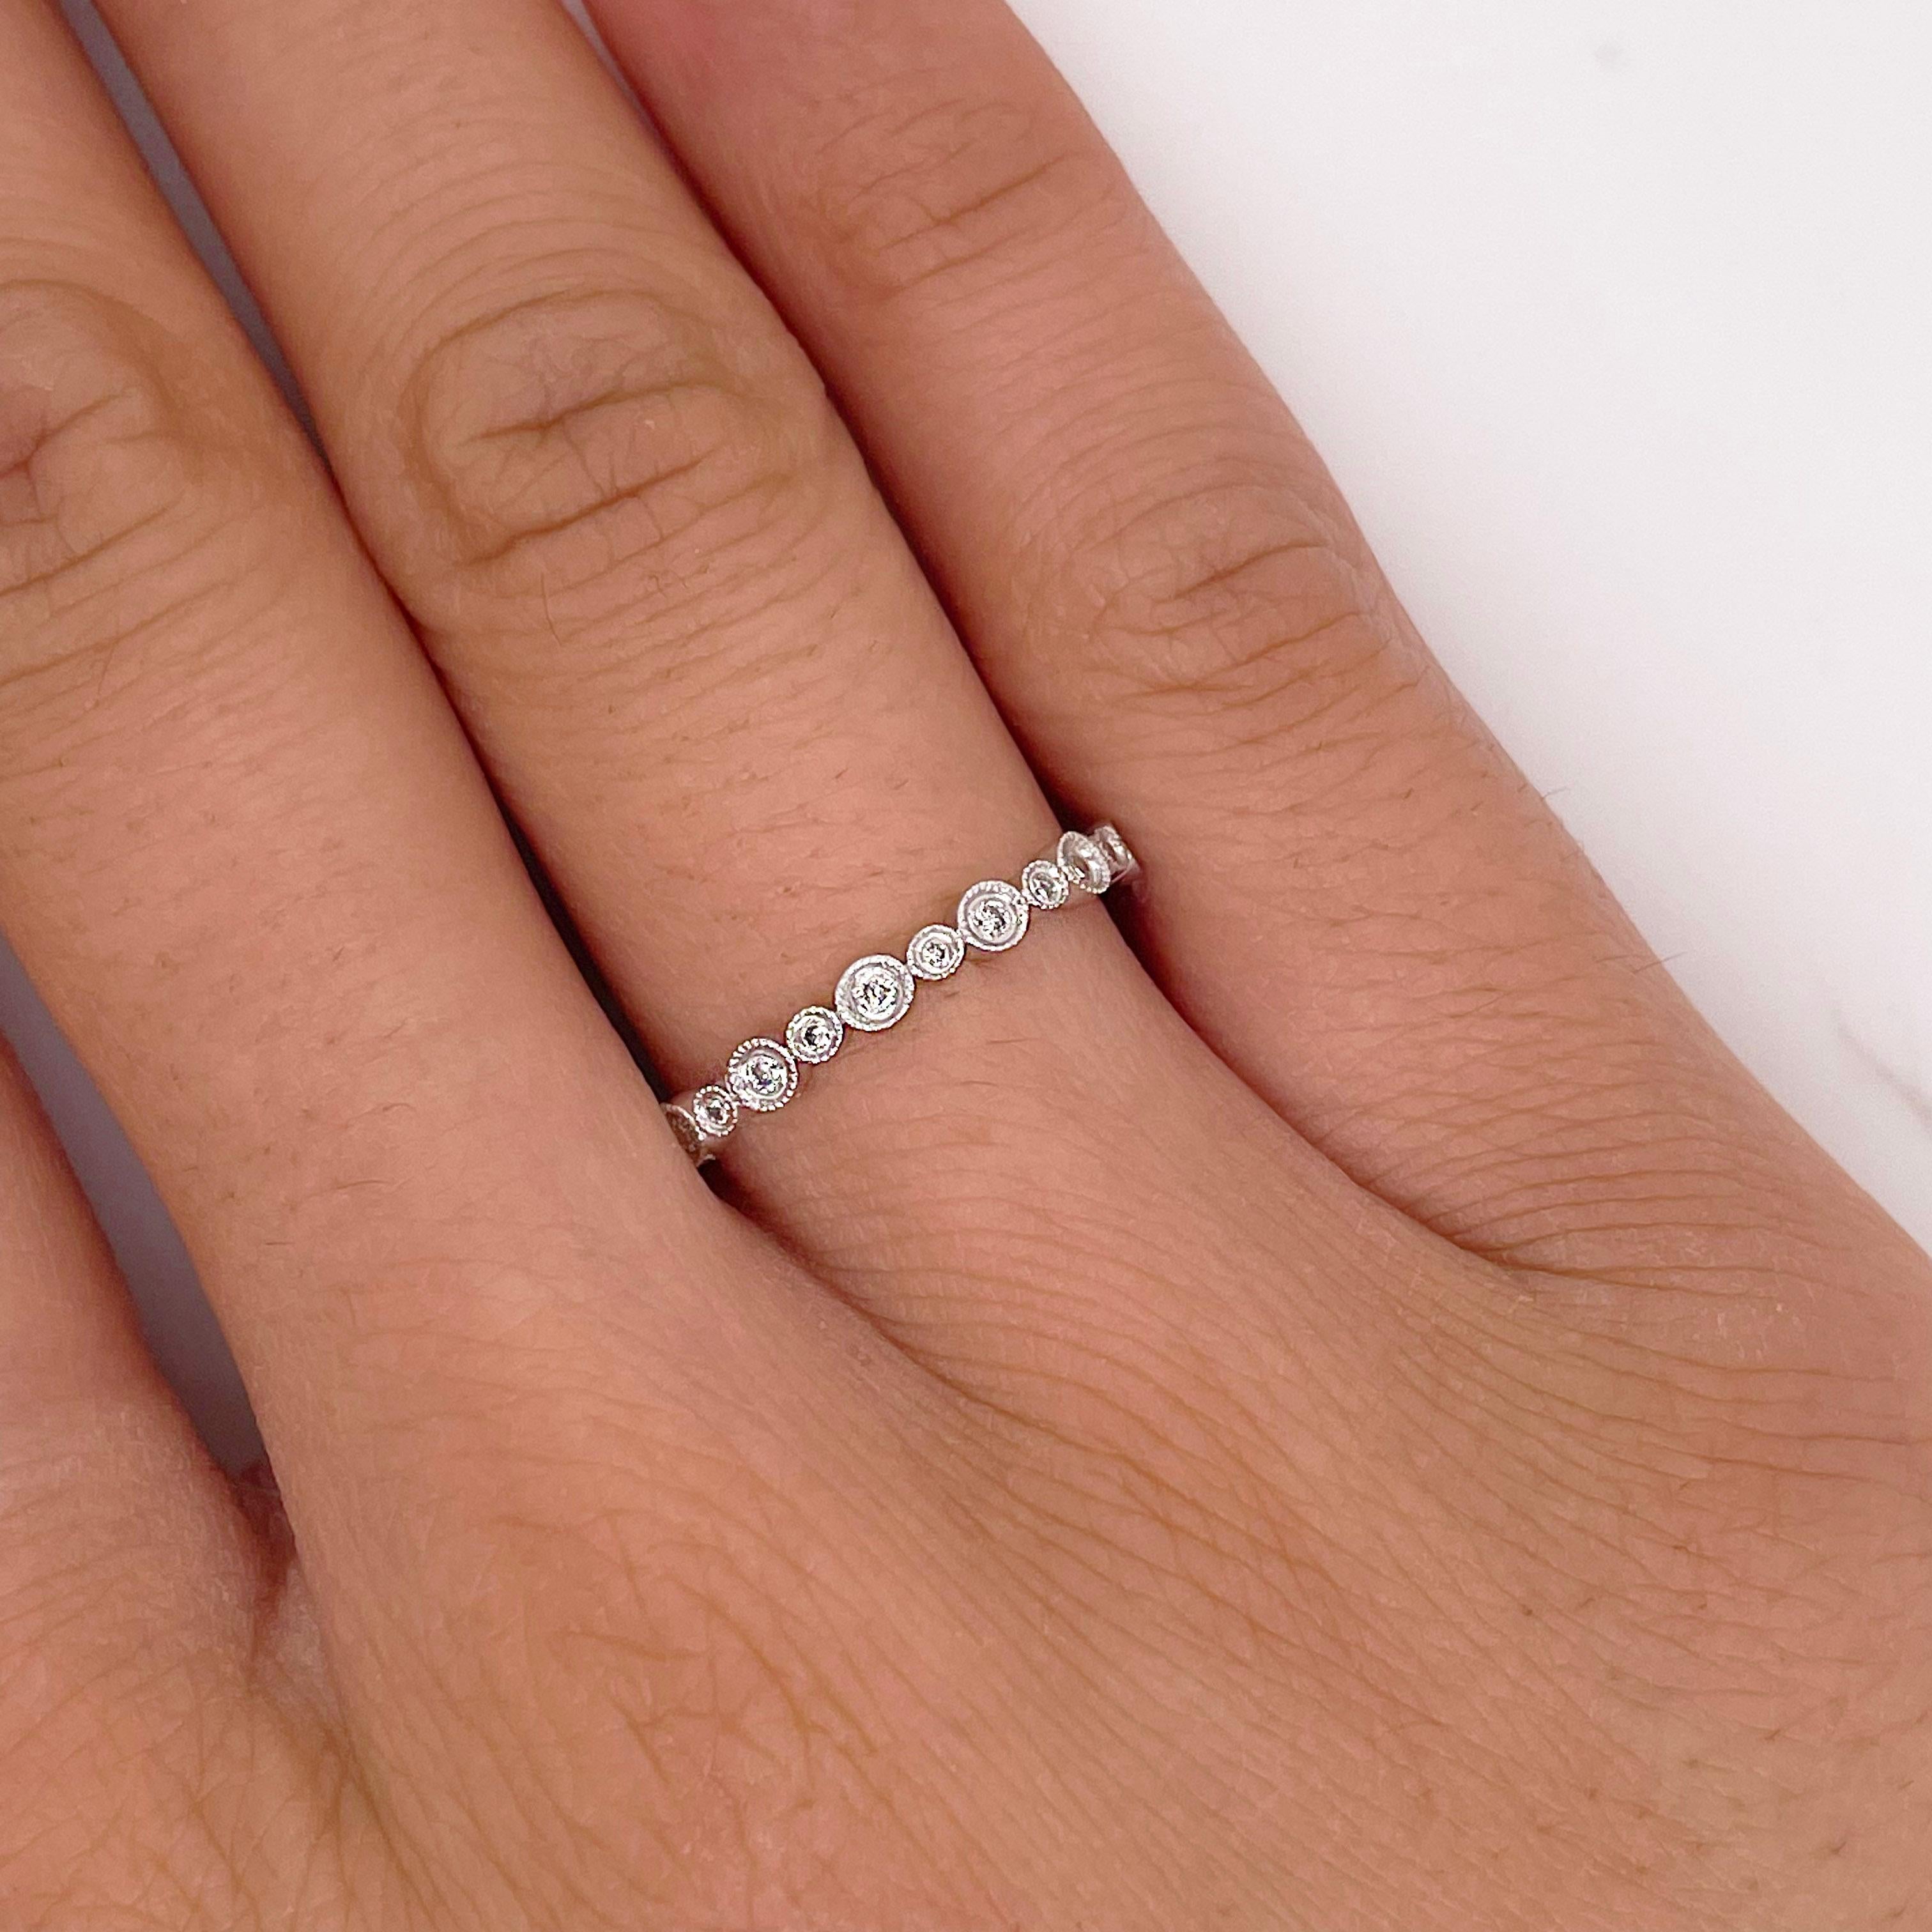 This is a diamond bezel eternity band with a unique design and bold, modern fashion look! This diamond band has round brilliant diamonds going all the way around the ring in an eternity band design. The diamonds alternate in bezel sizes giving the